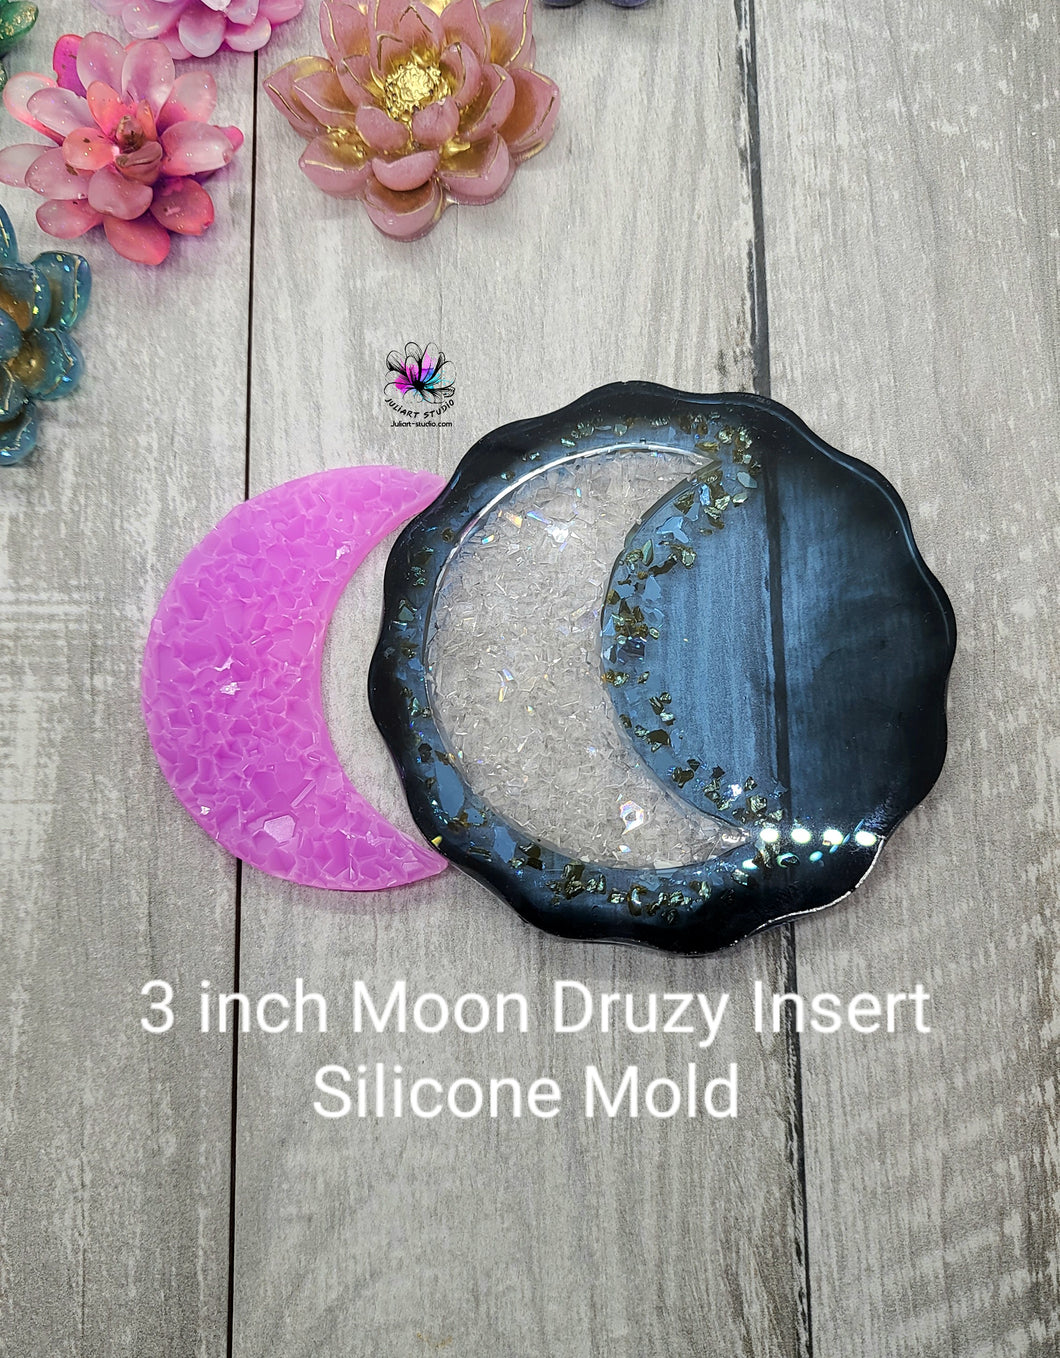 3 inch Moon Druzy Insert Silicone Mold for Resin